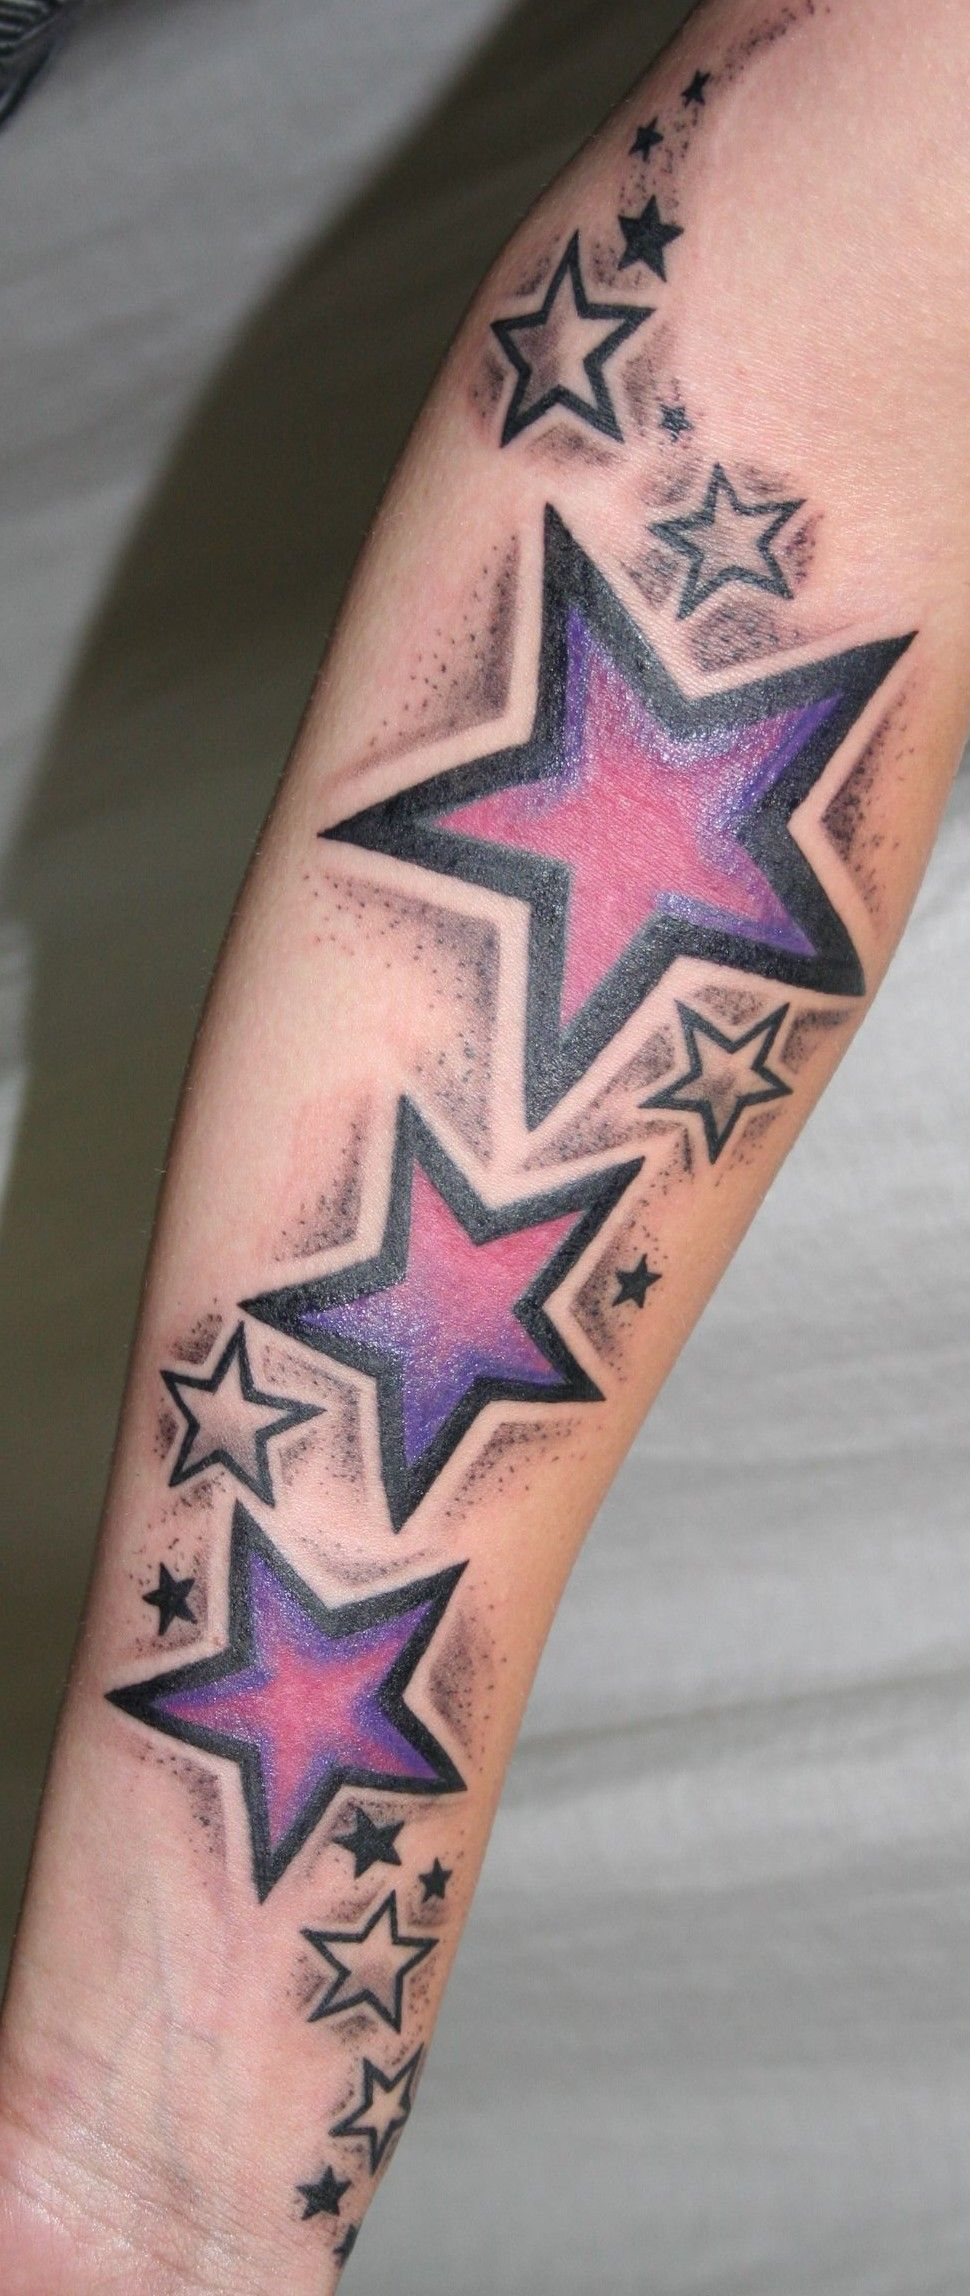 Shooting Red White And Blue Nautical Star Tattoo Big And Small throughout dimensions 970 X 2296